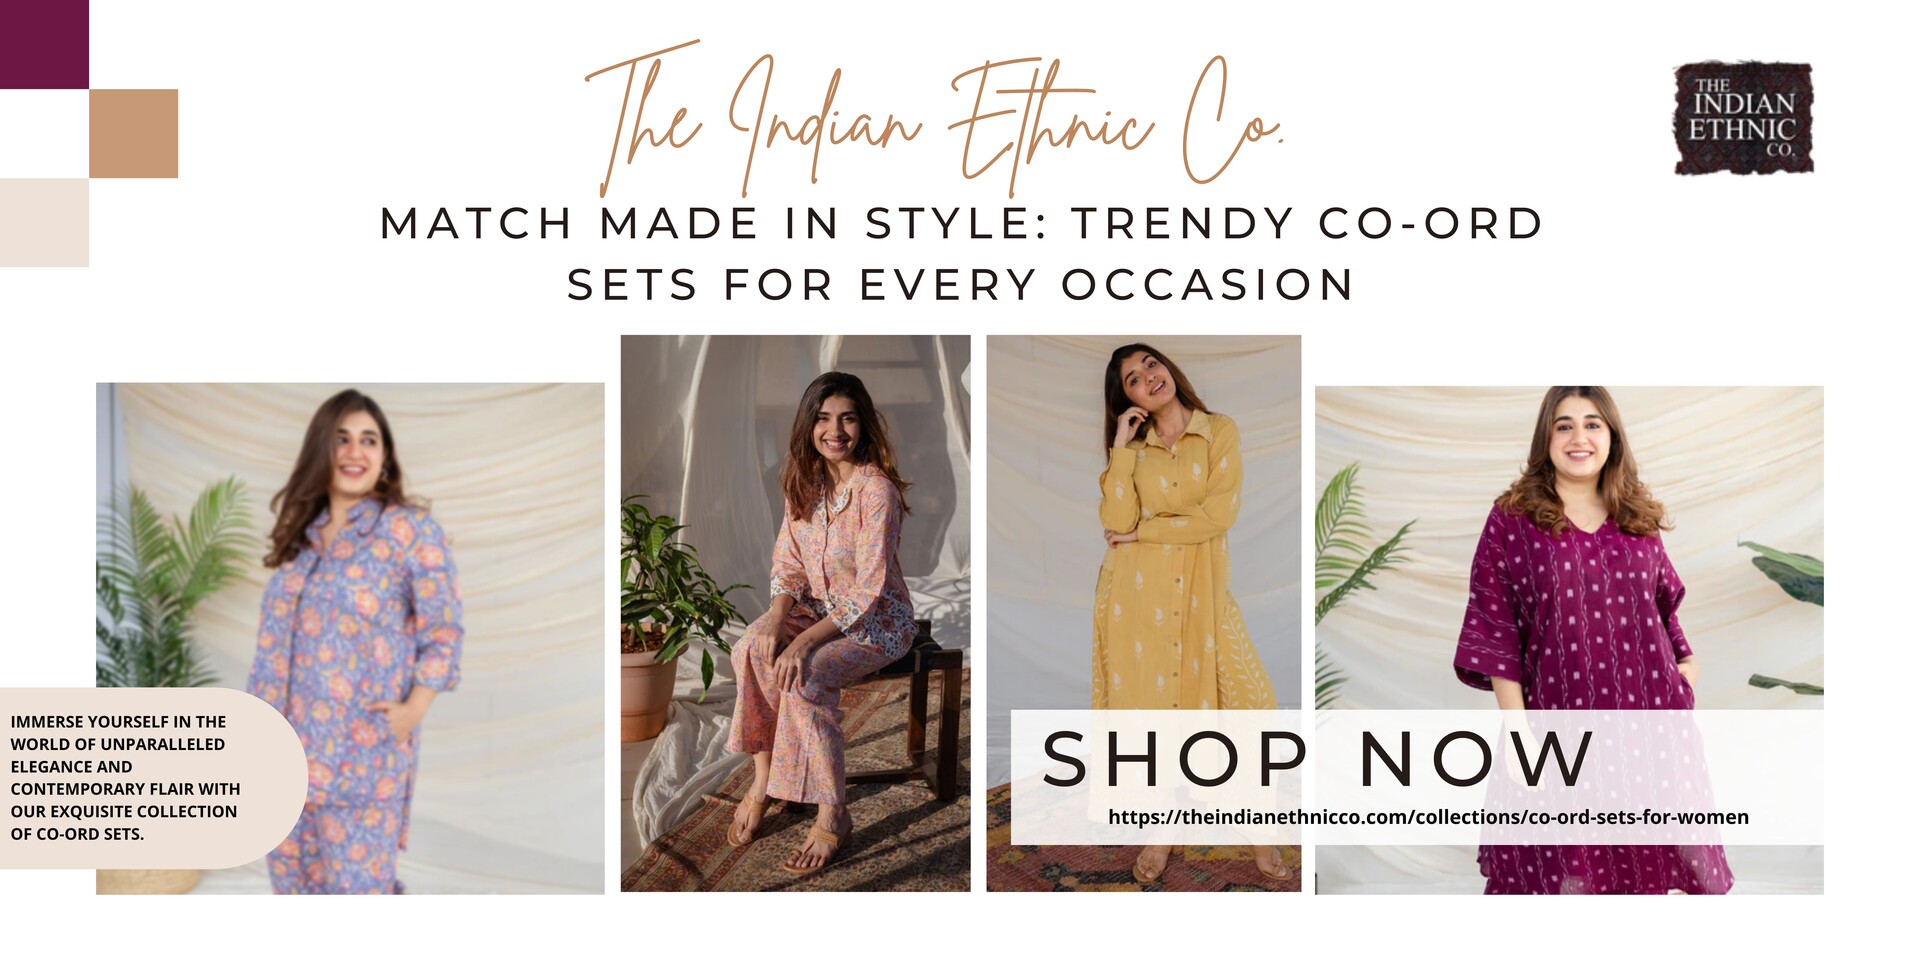 https://cdna.artstation.com/p/assets/images/images/071/301/464/large/the-indian-ethnic-co-shop-trendy-co-ord-sets-for-every-occasion.jpg?1704893291